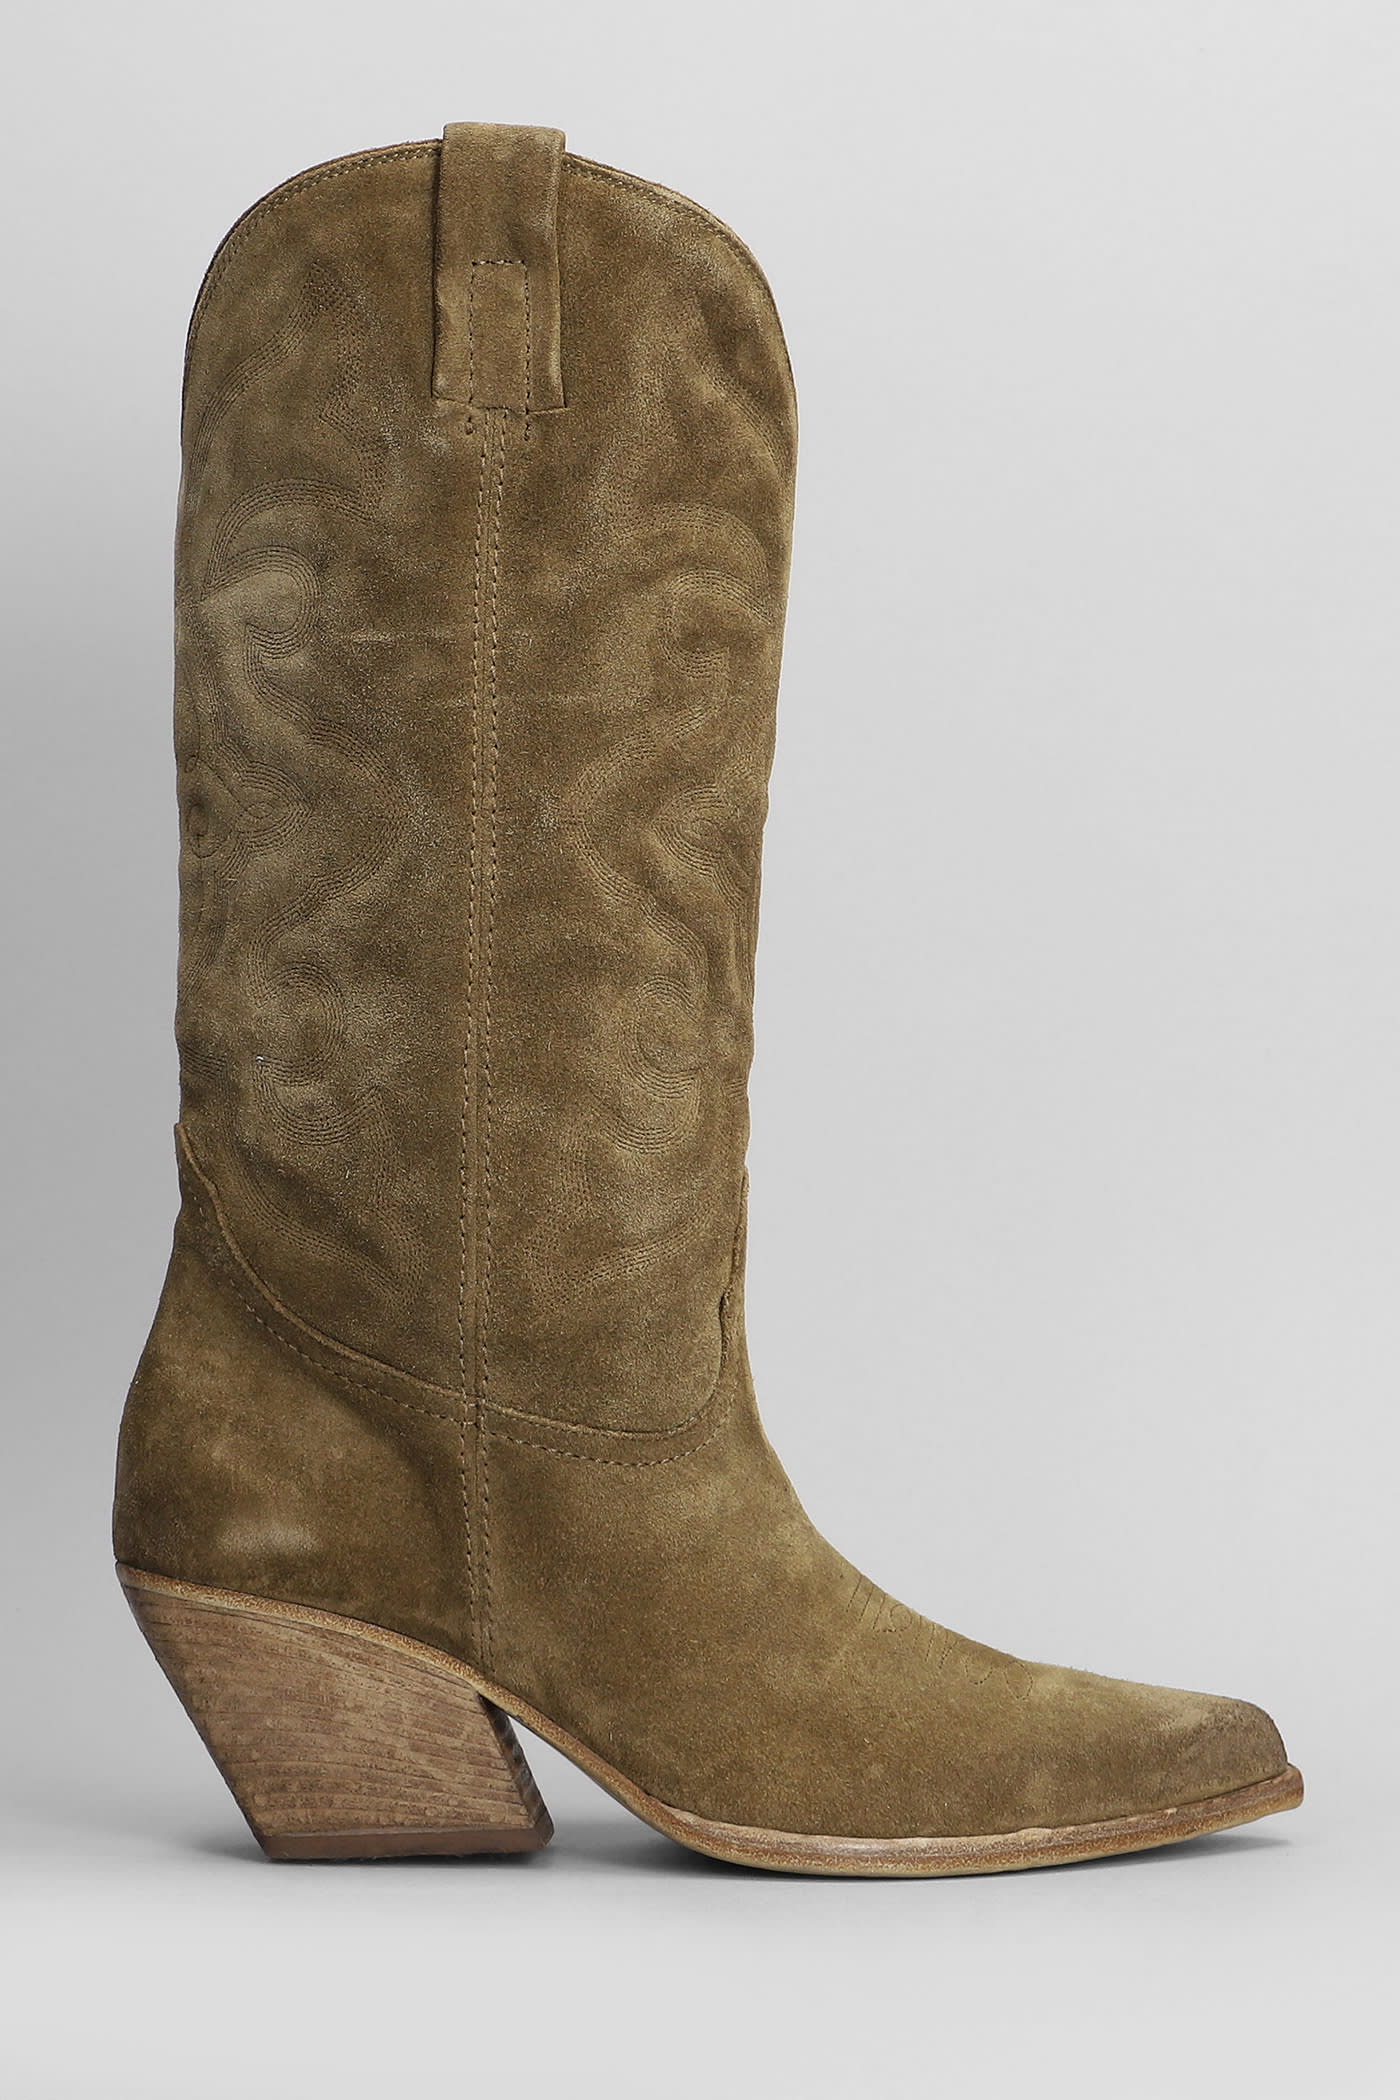 Elena Iachi Texan Boots In Taupe Suede